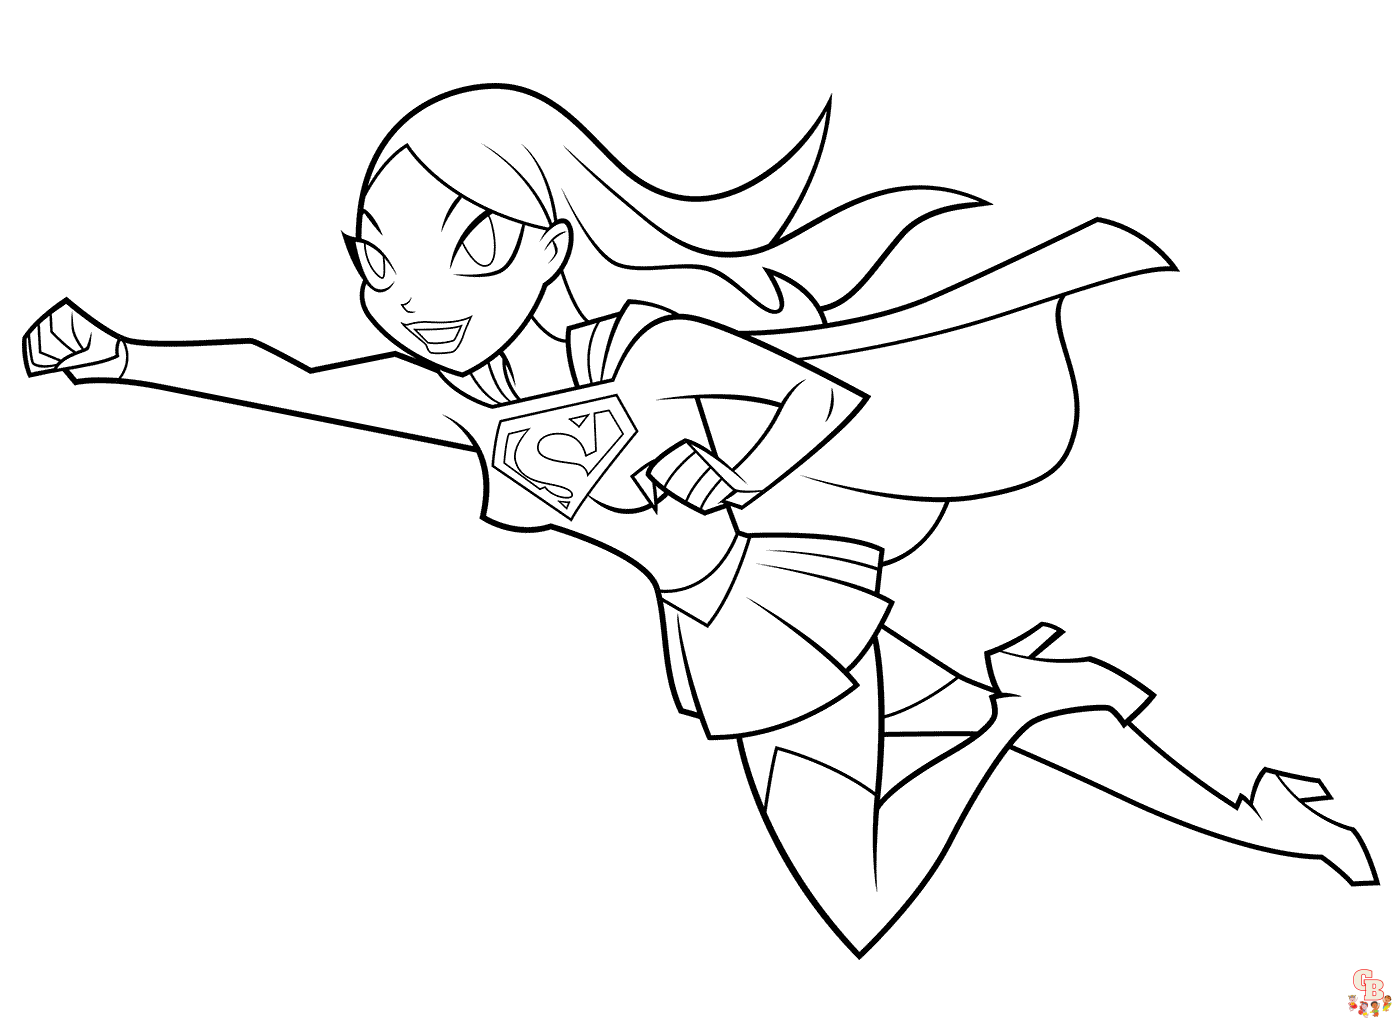 Super girl coloring pages for kids